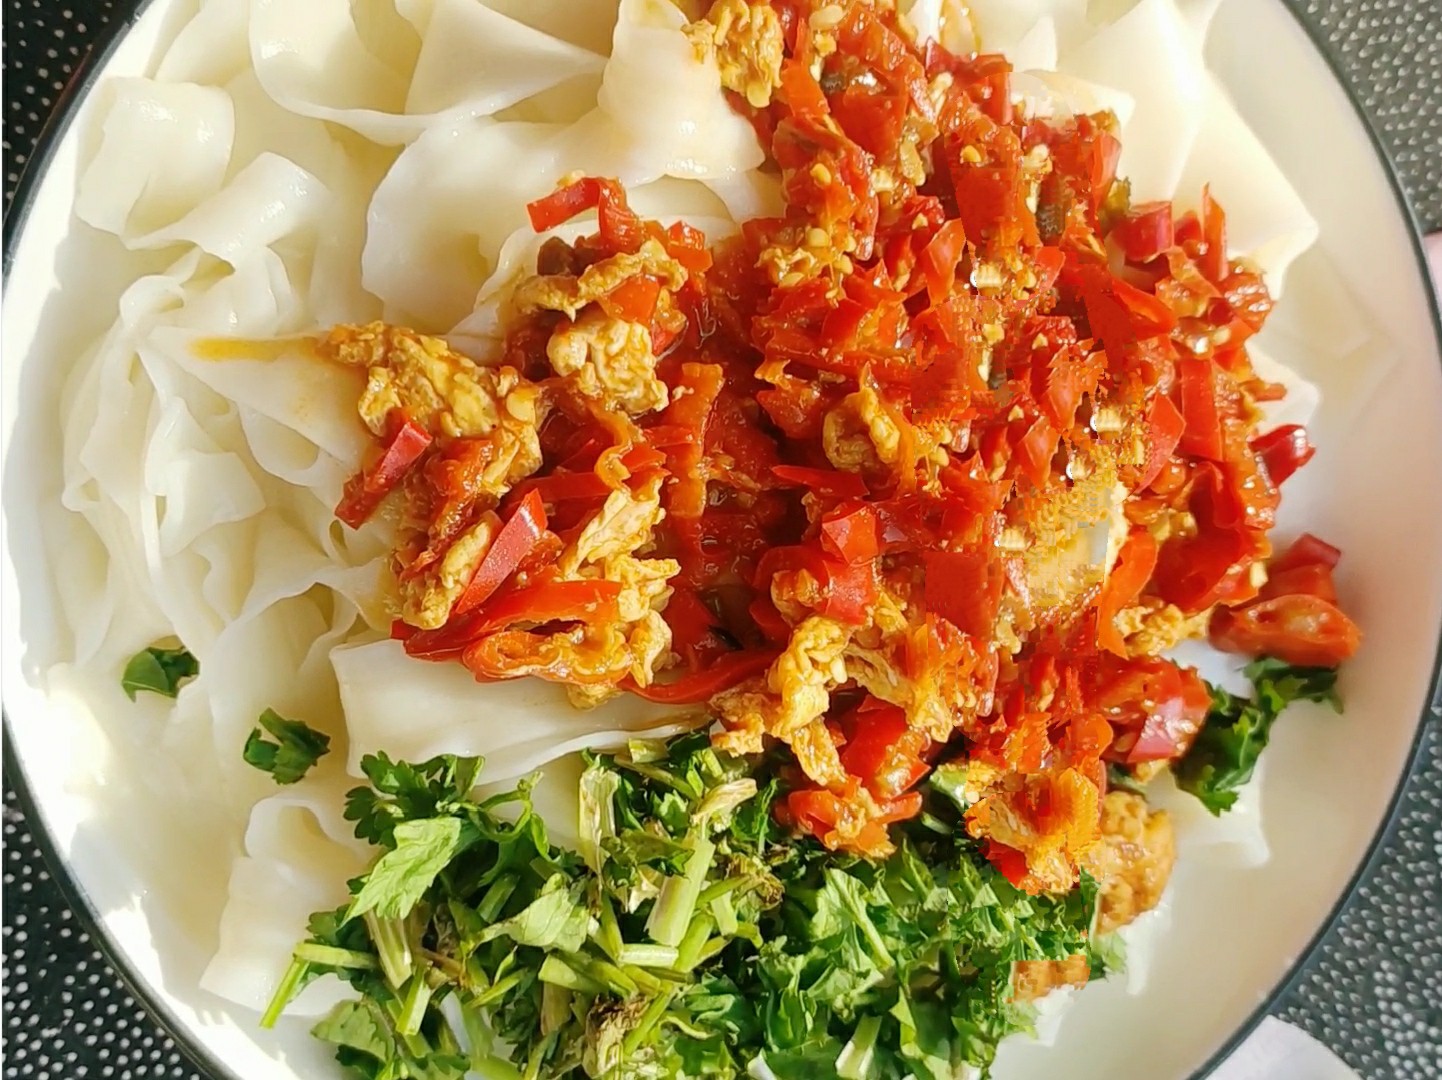 Noodles with Chili Egg Sauce recipe